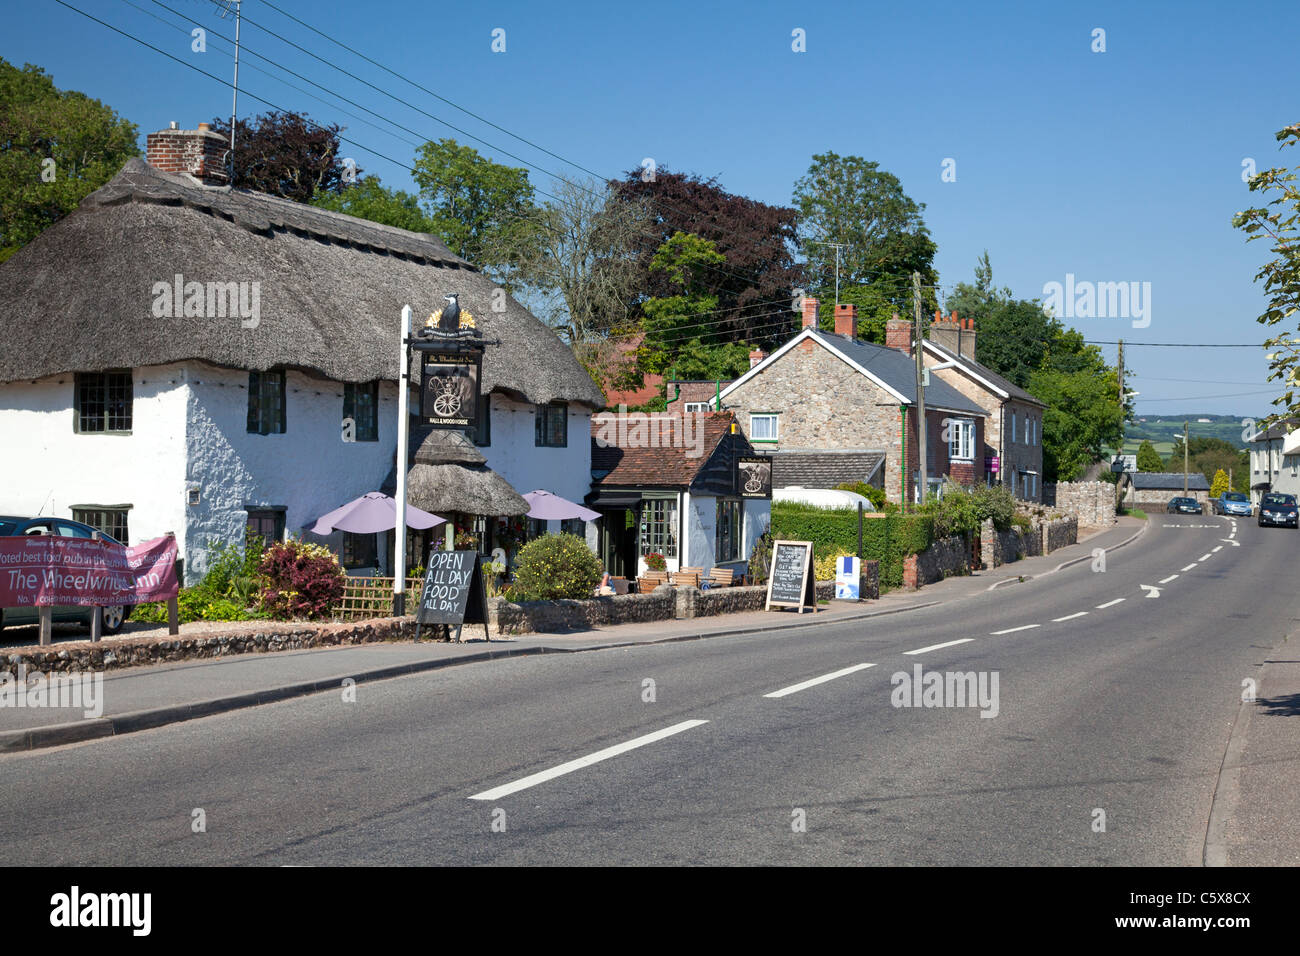 Main road with the Wheelwright pub in the foreground, Colyford, Devon Stock Photo